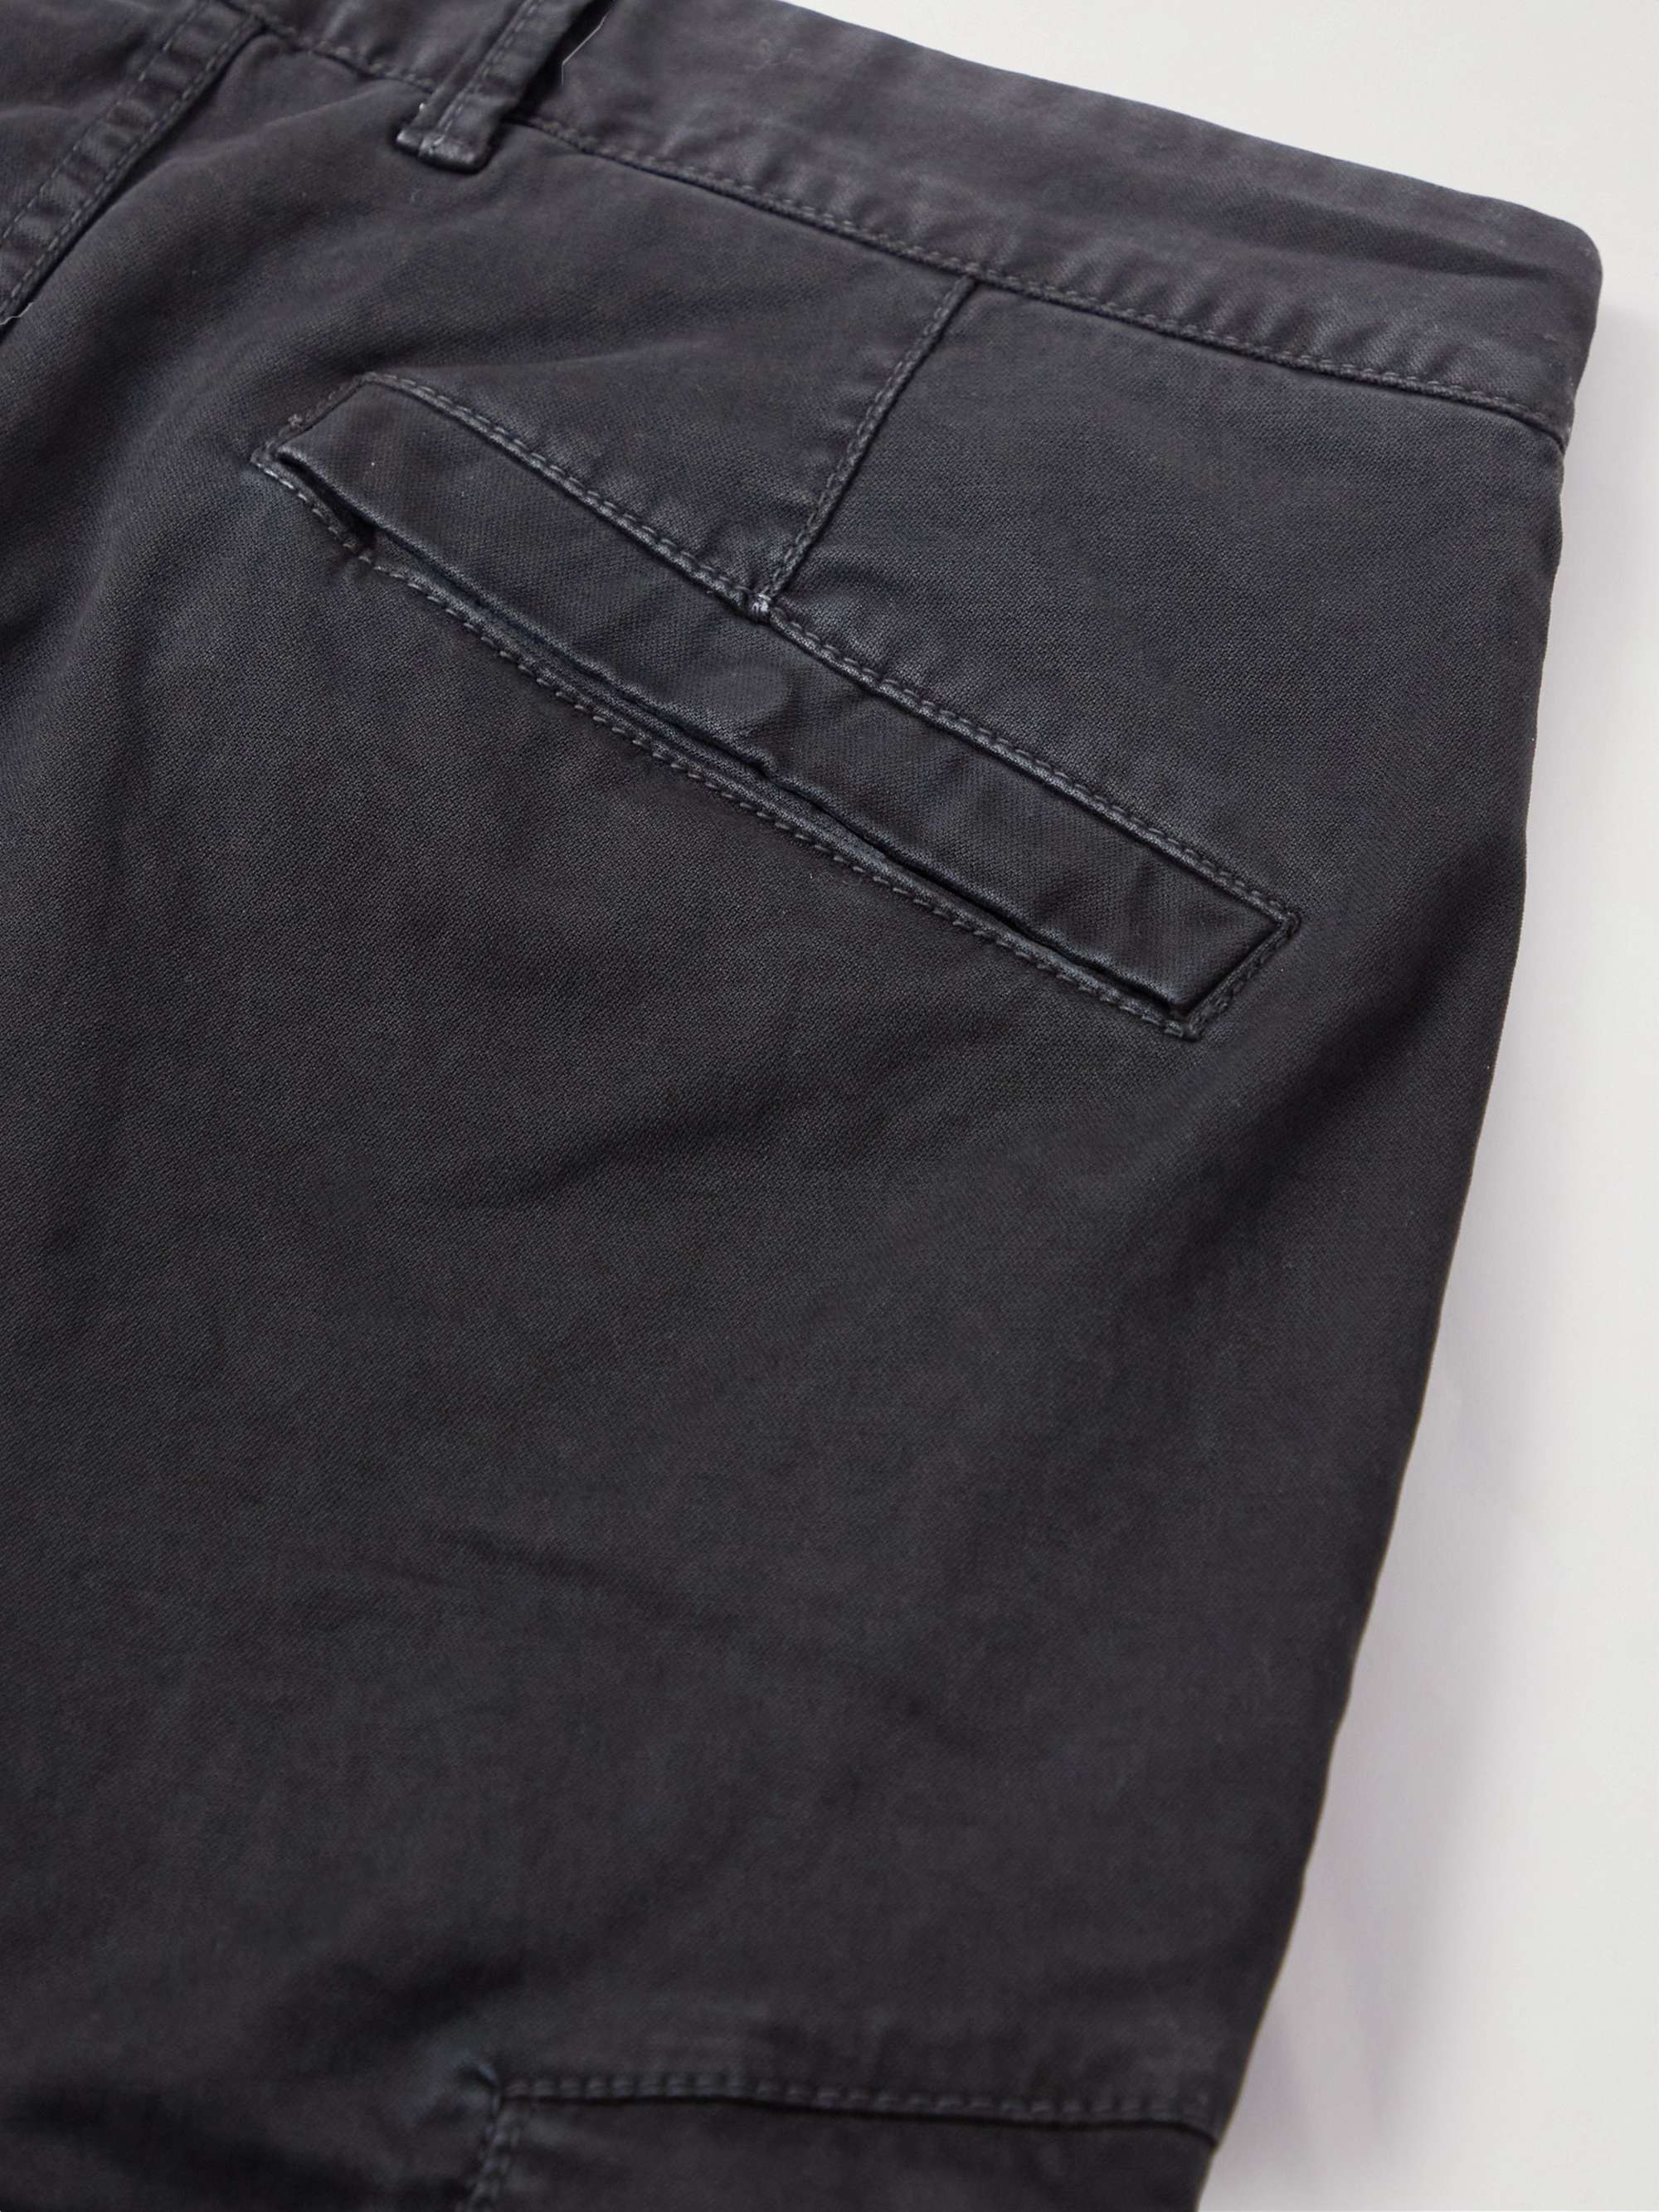 STONE ISLAND Slim-Fit Garment-Dyed Cotton-Blend Twill Cargo Trousers ...